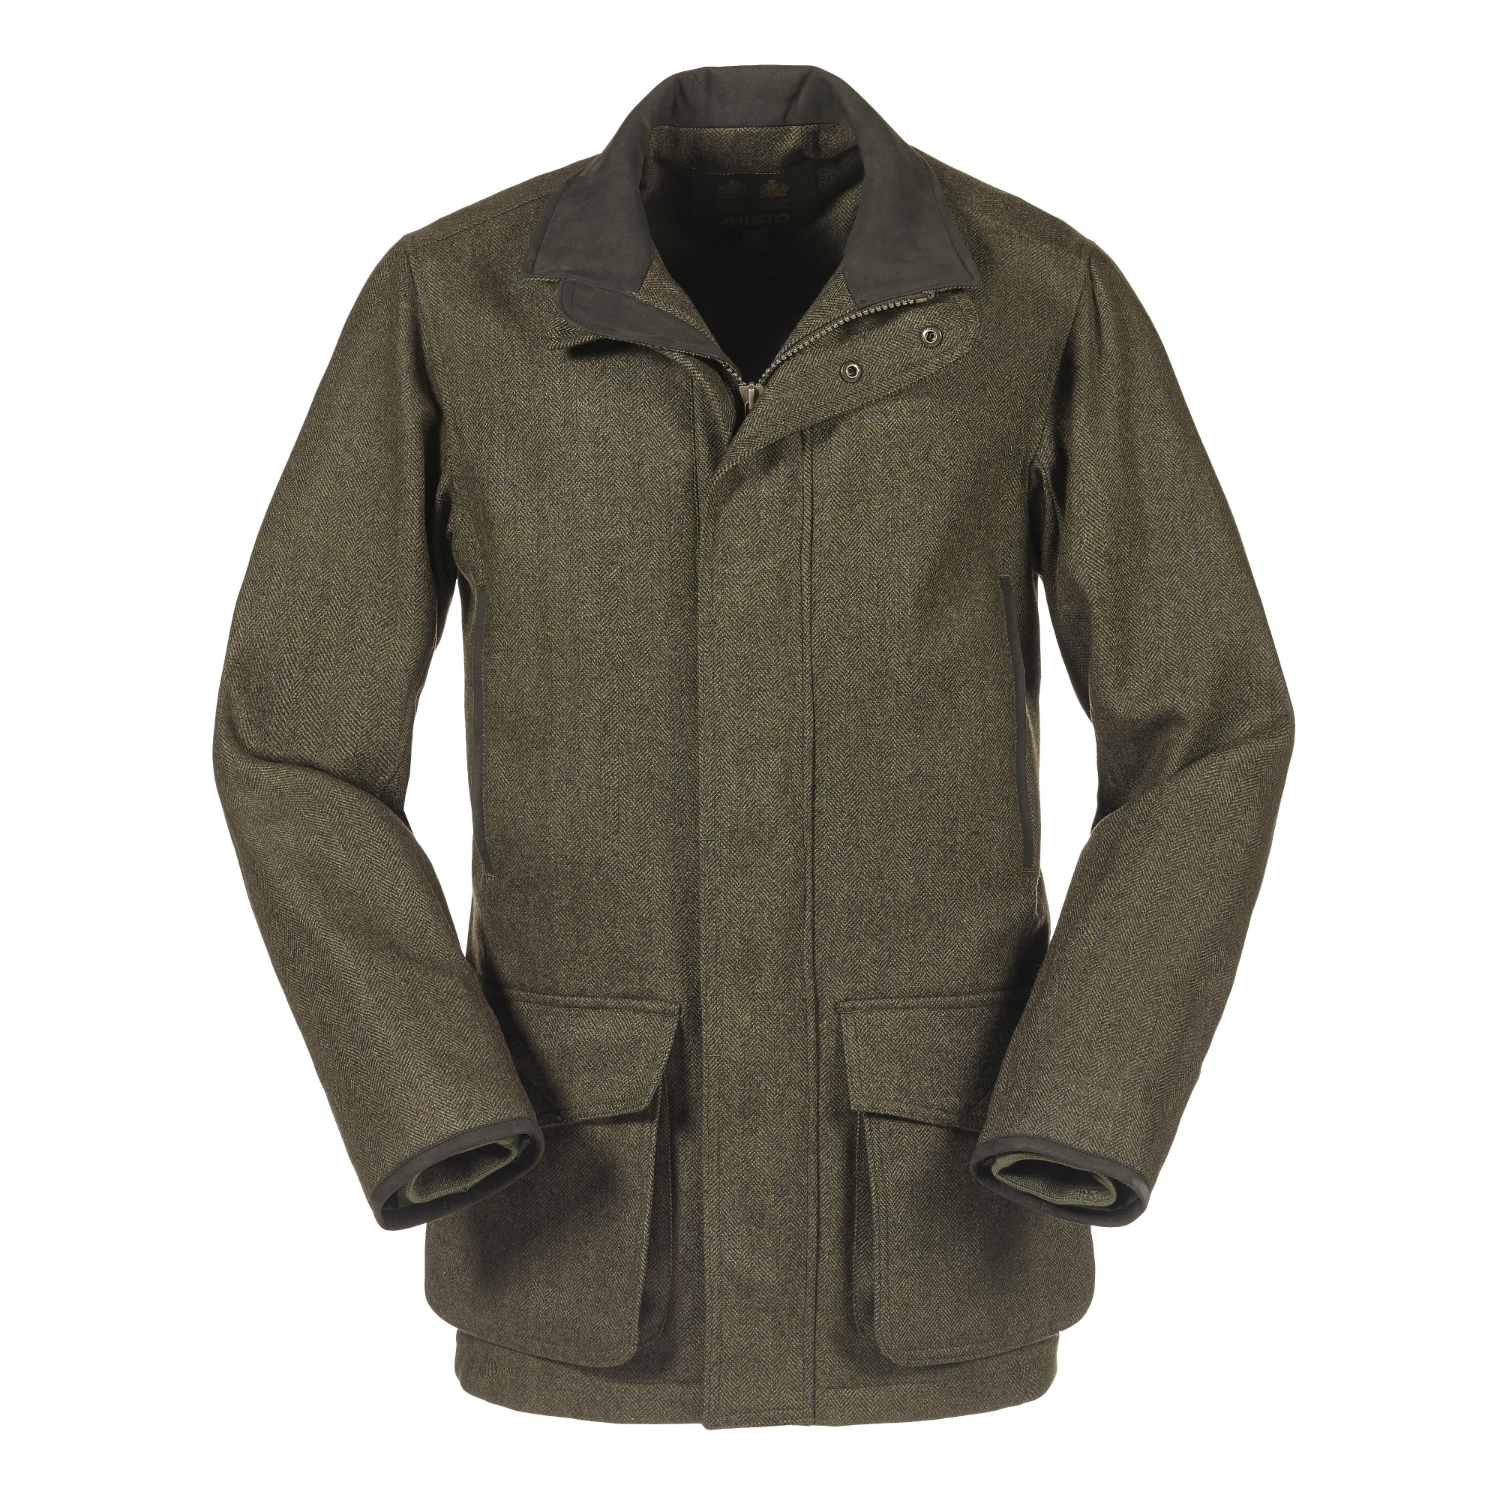 Mens Tweed Jackets For Sale at Countryway Gunshop